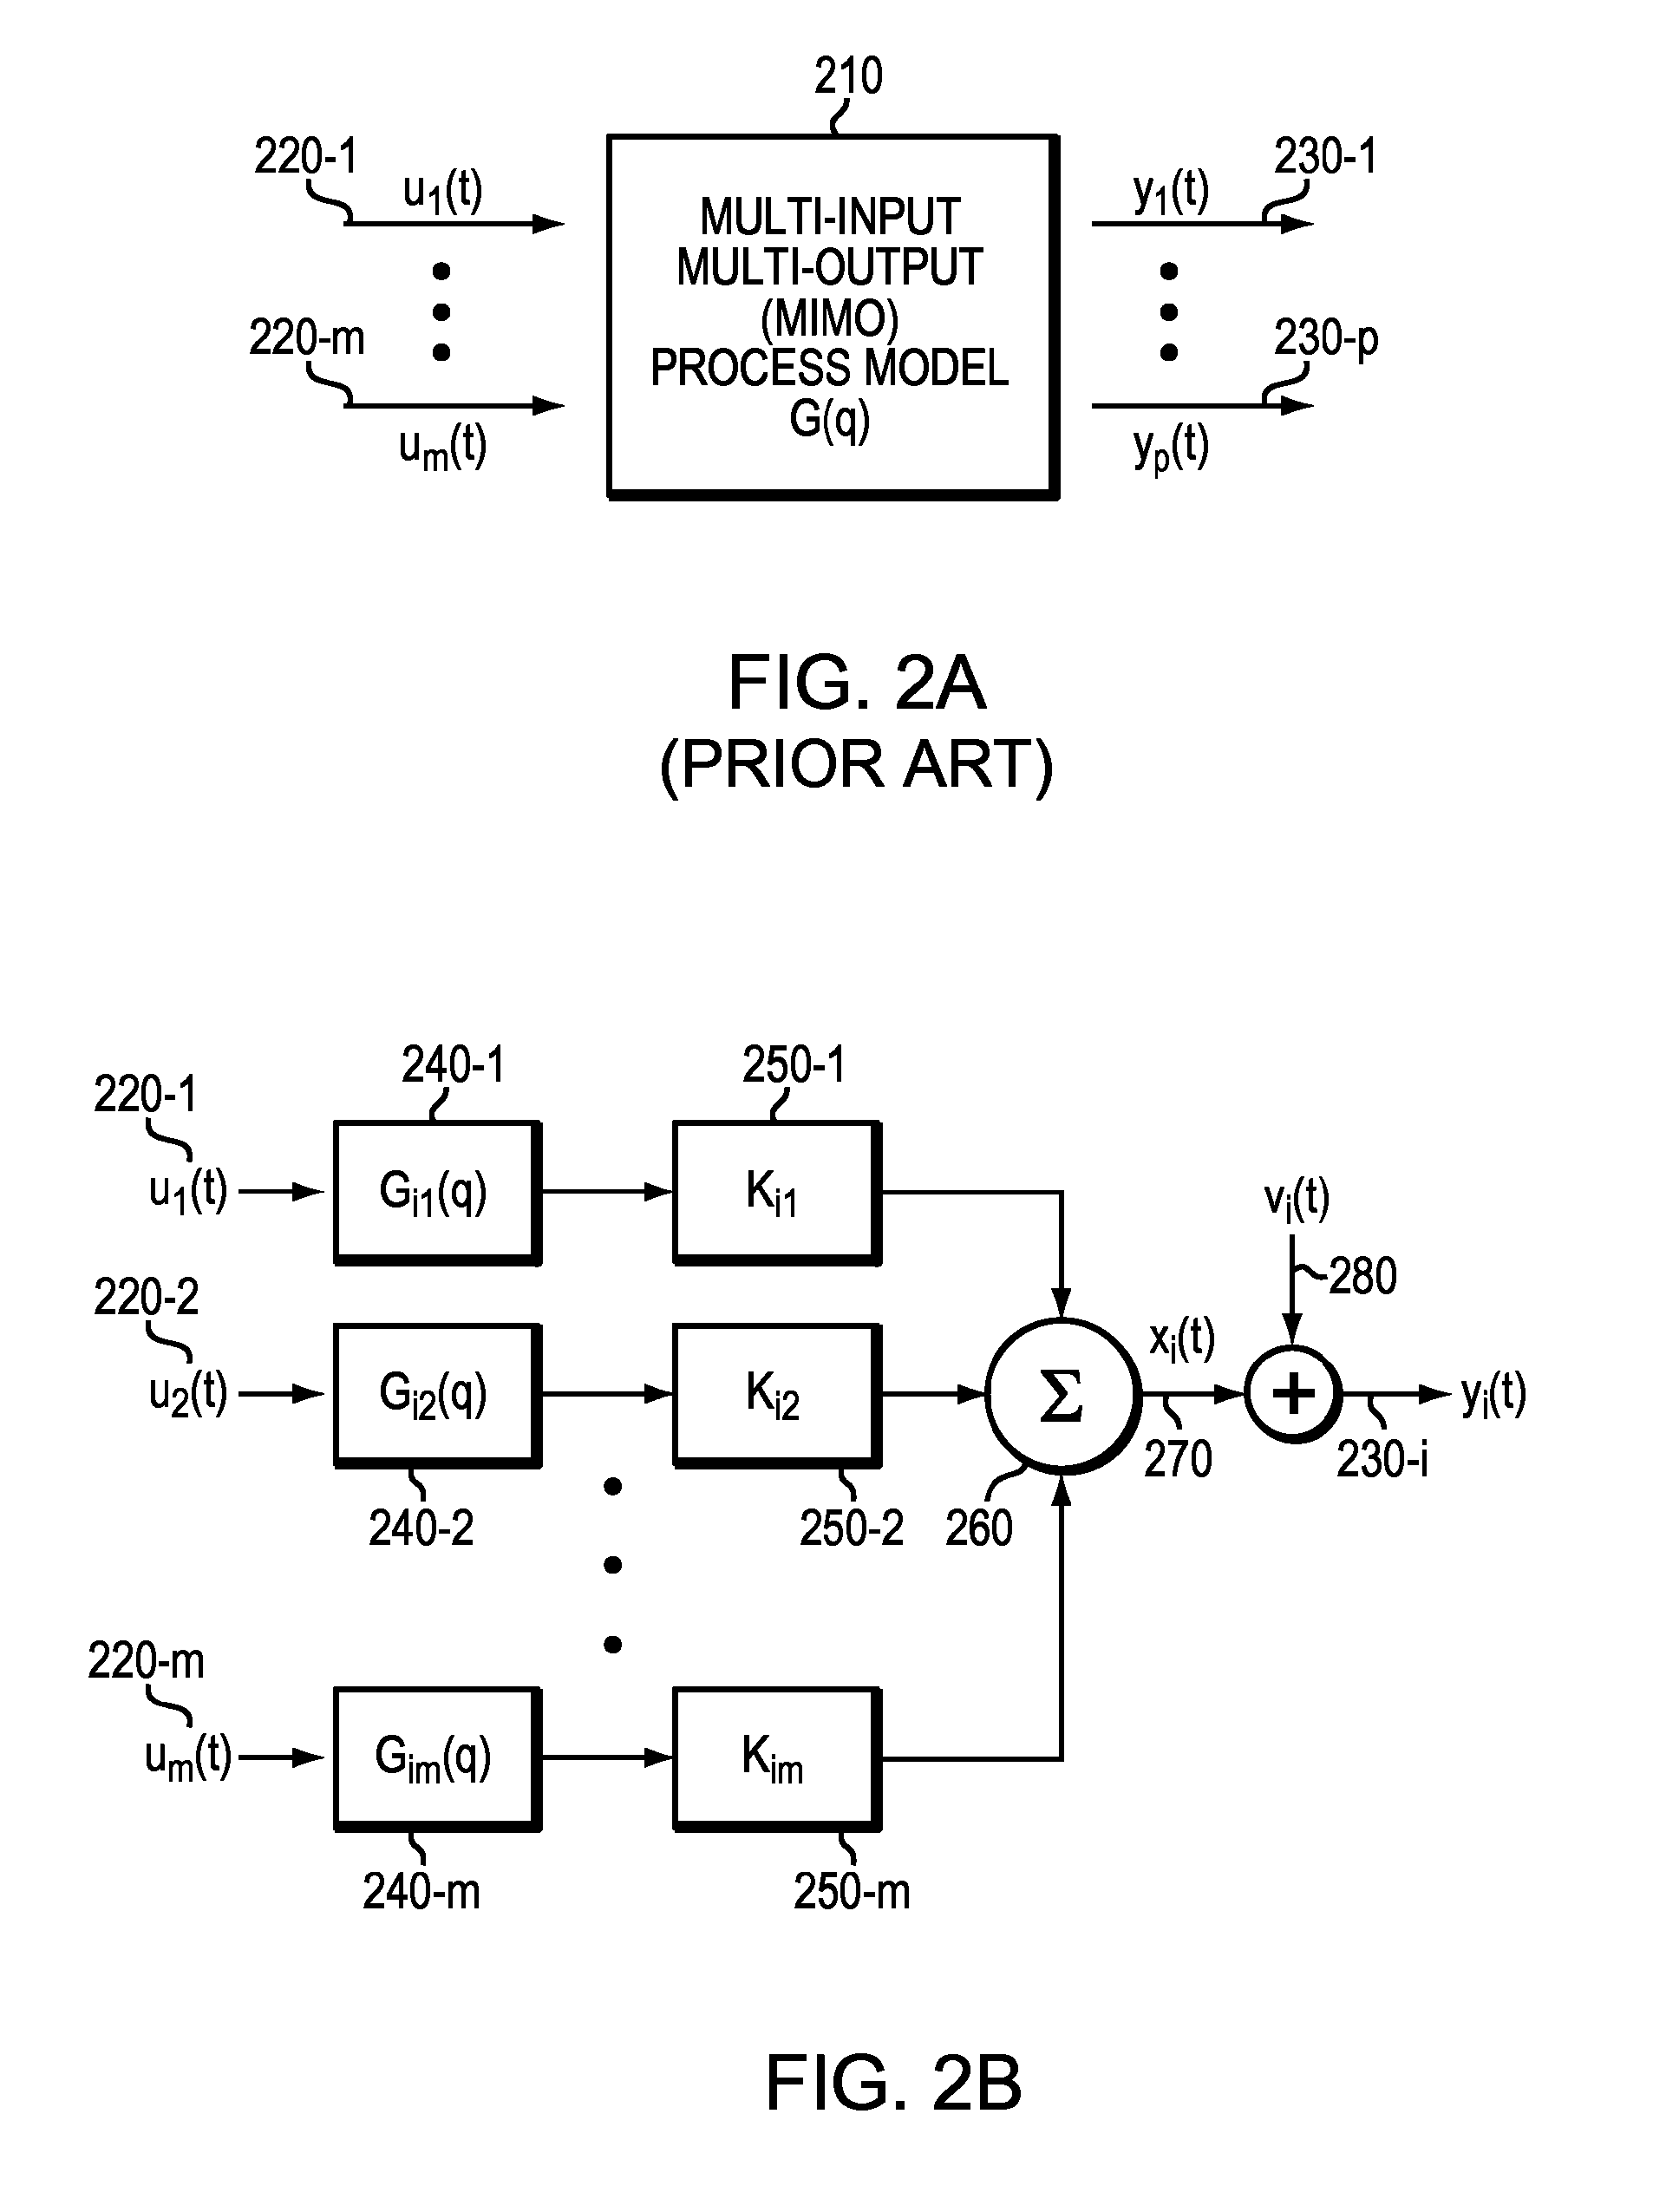 Apparatus and method for model quality estimation and model adaptation in multivariable process control